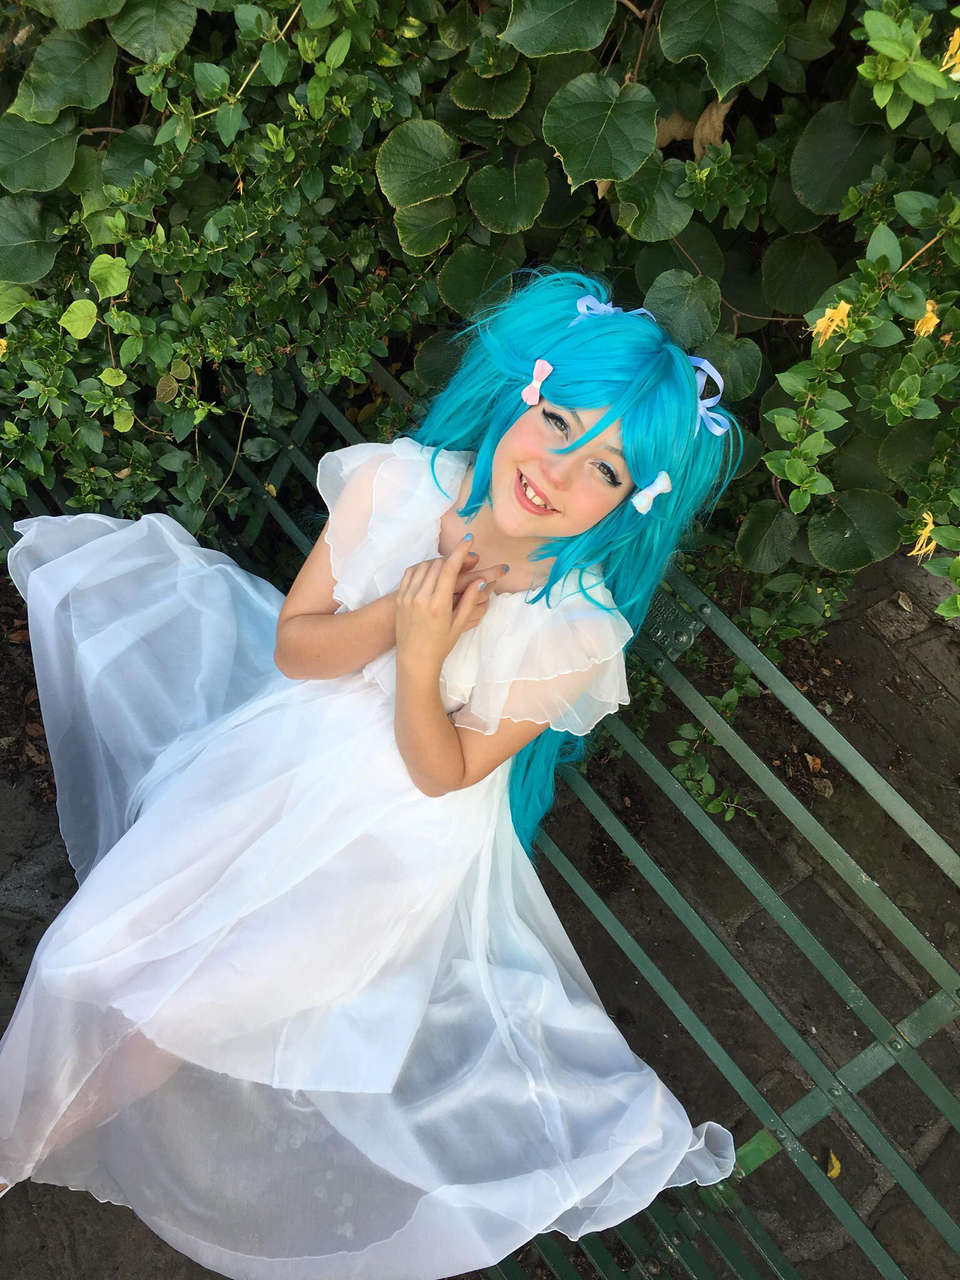 My Pizzicato Miku Cosplay I Dont Know If I Did Miku Chan Justice But I Tried My Bes